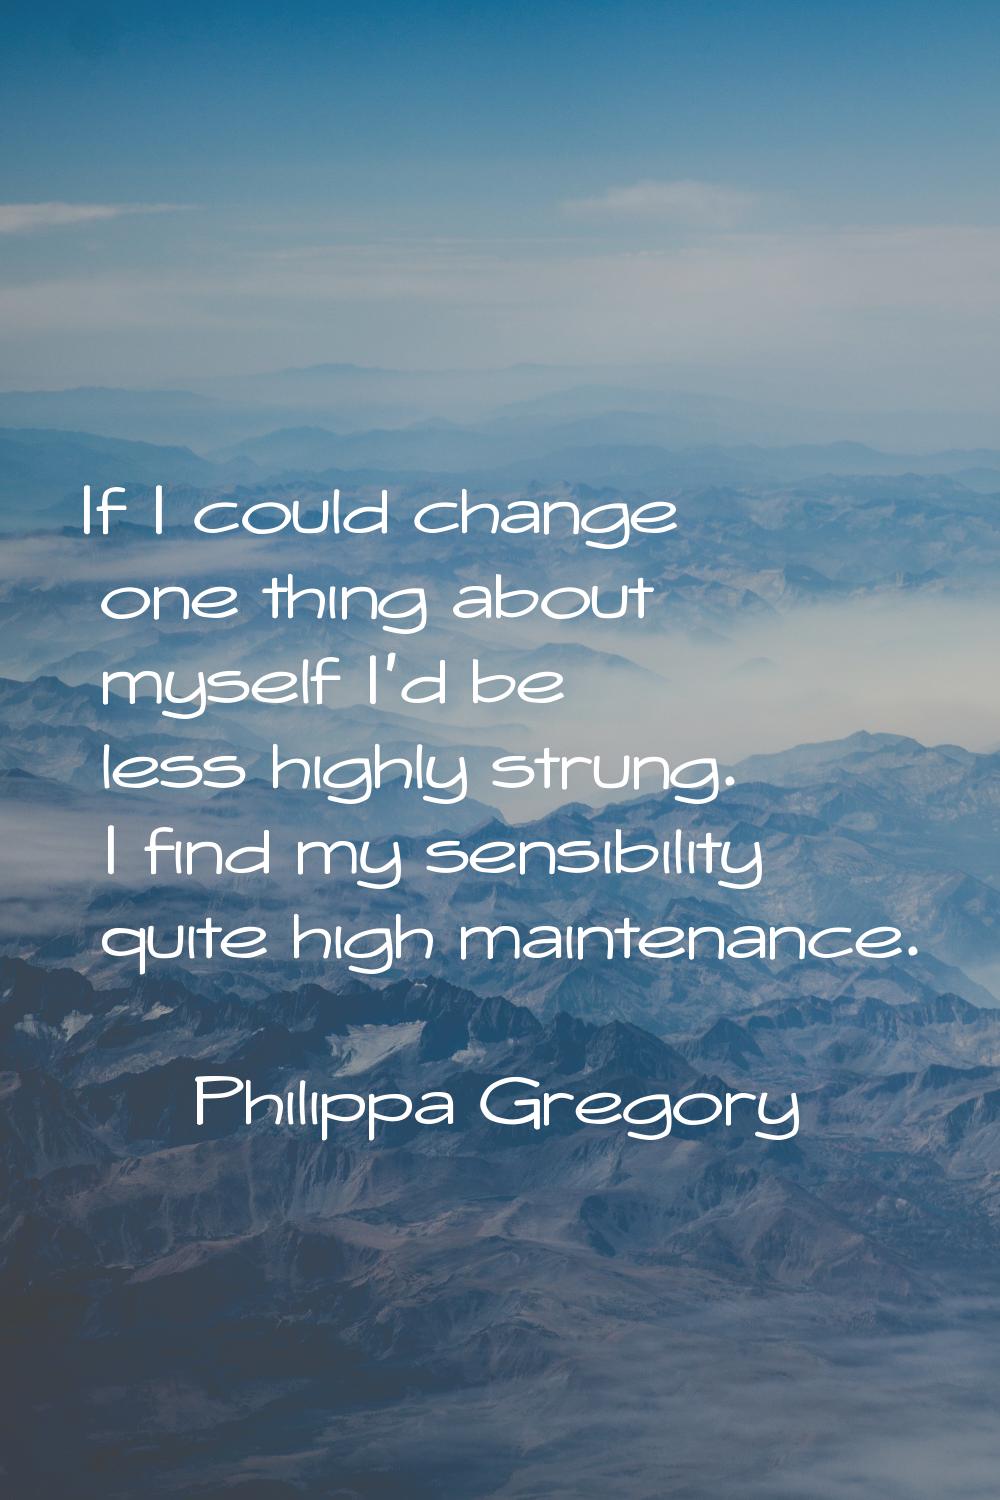 If I could change one thing about myself I'd be less highly strung. I find my sensibility quite hig